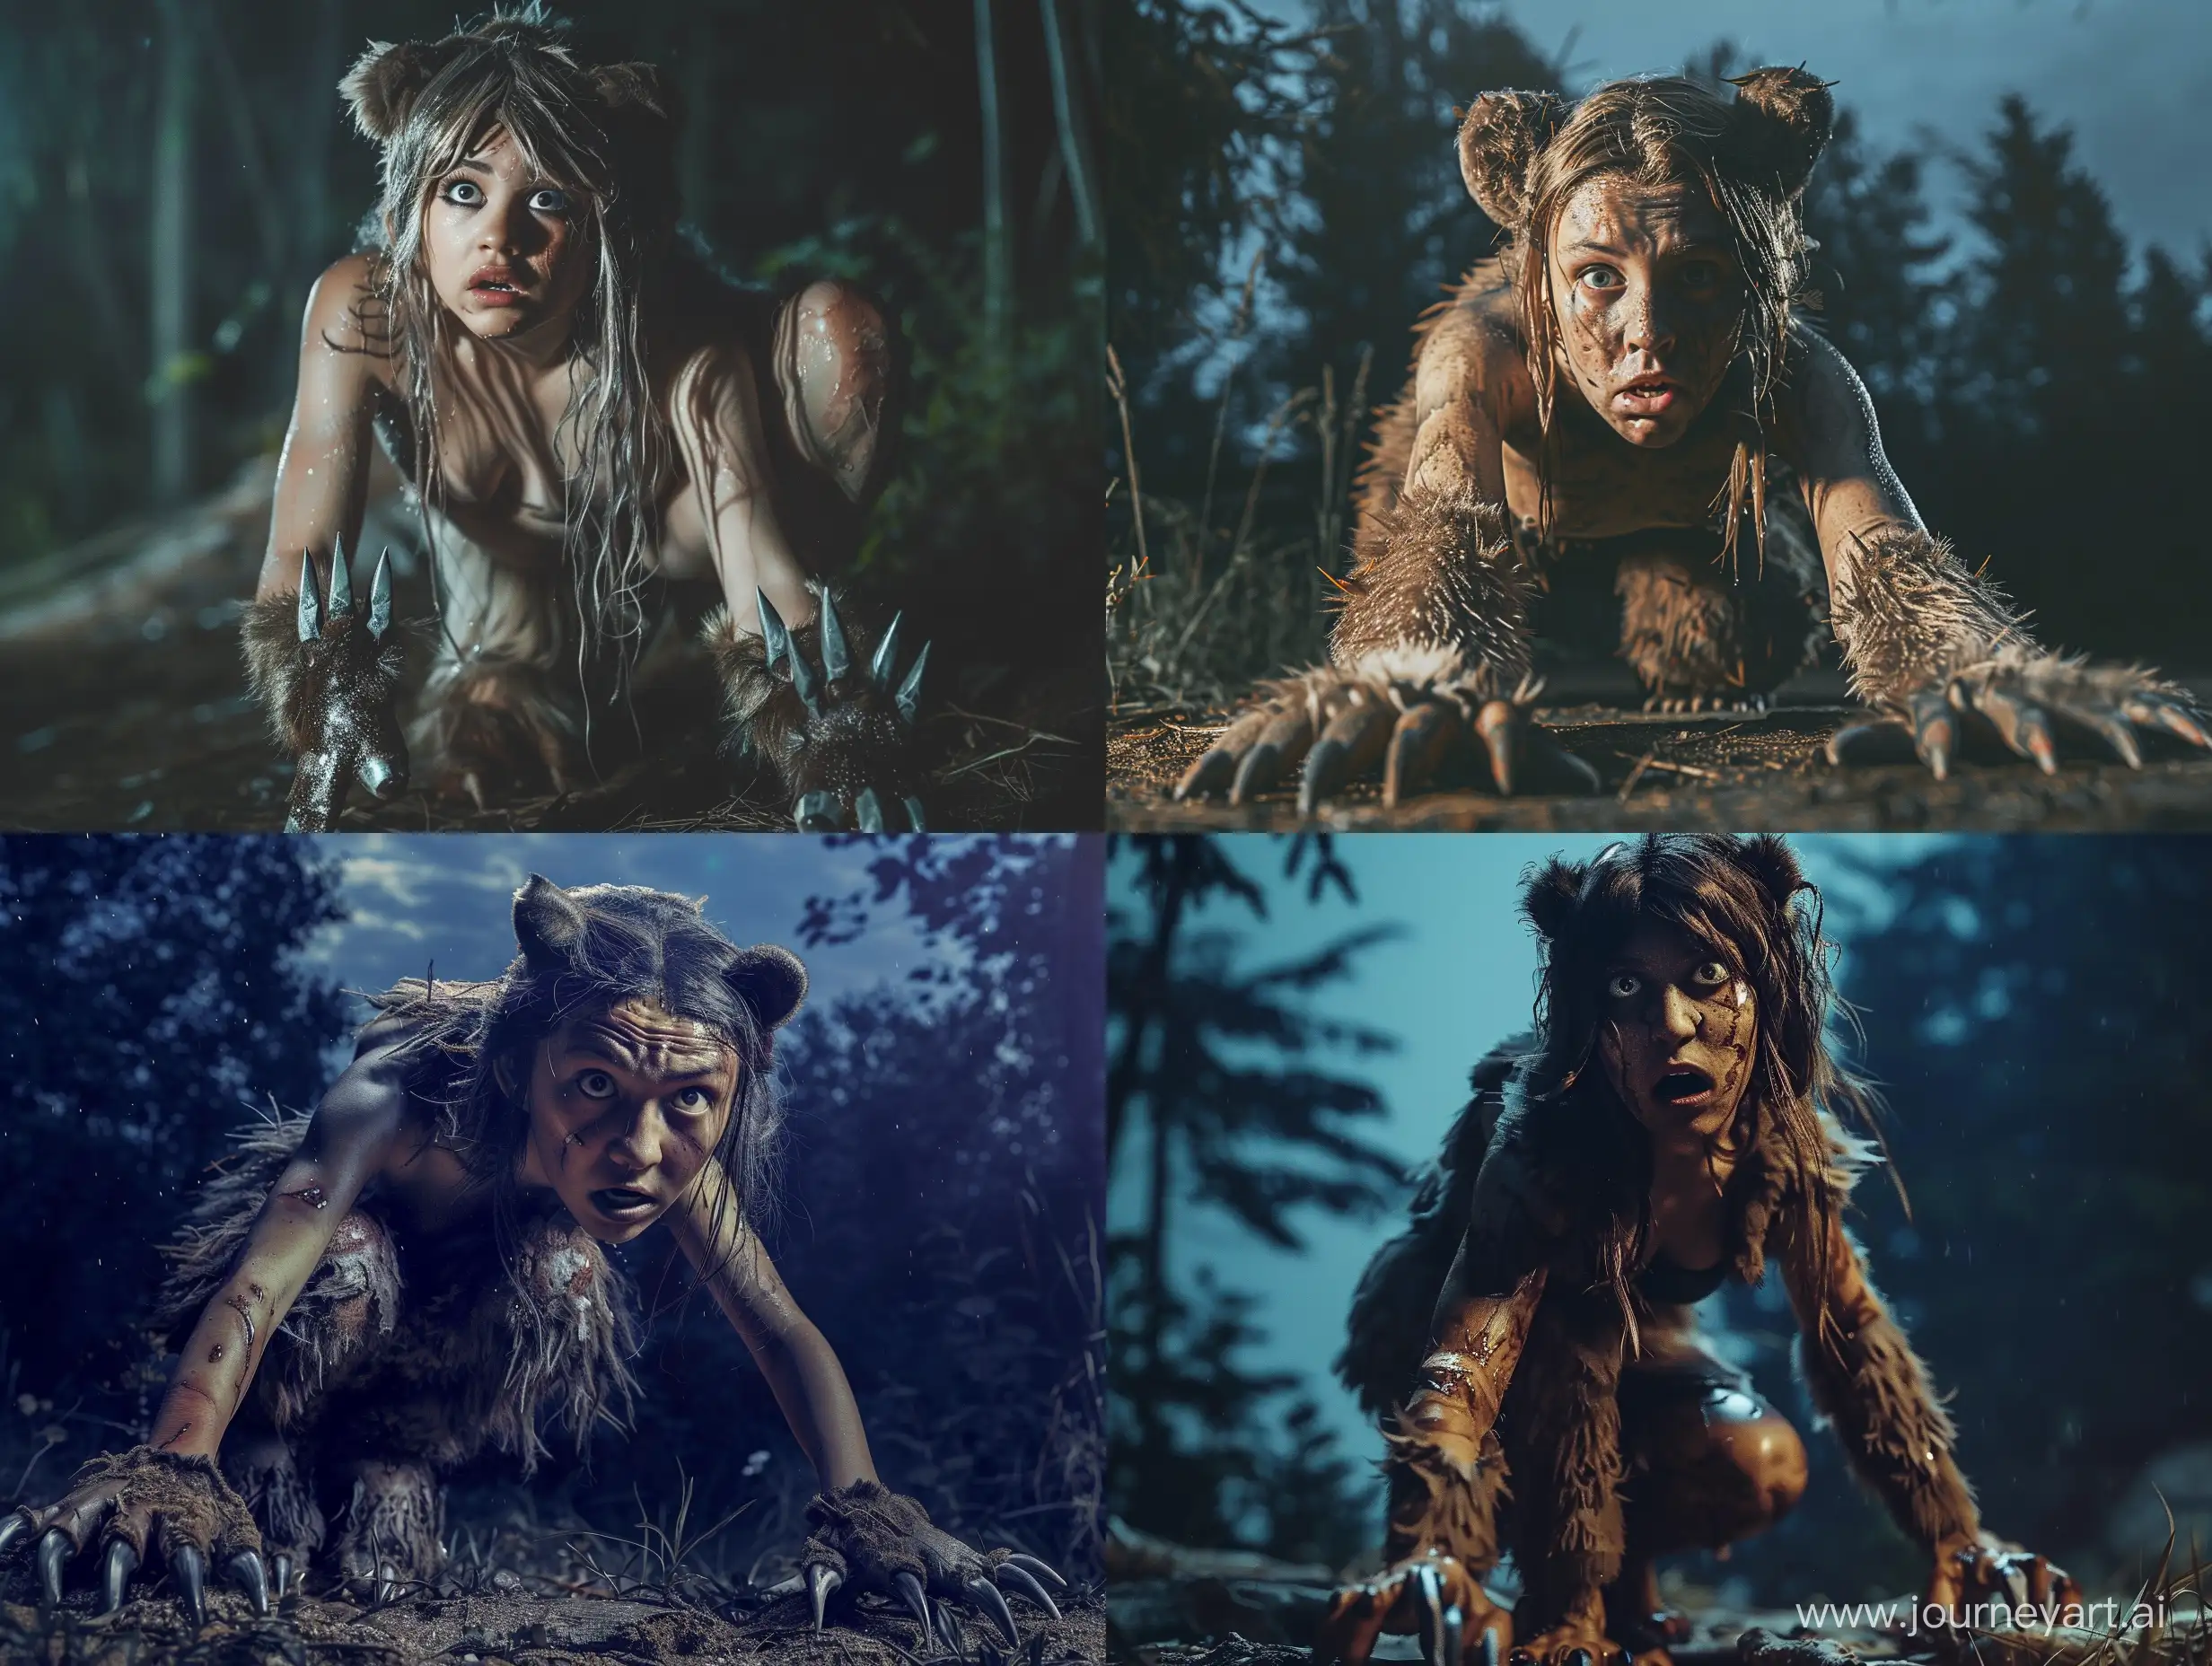 Confused-and-Scared-Woman-Transformed-into-Bear-in-Night-Forest